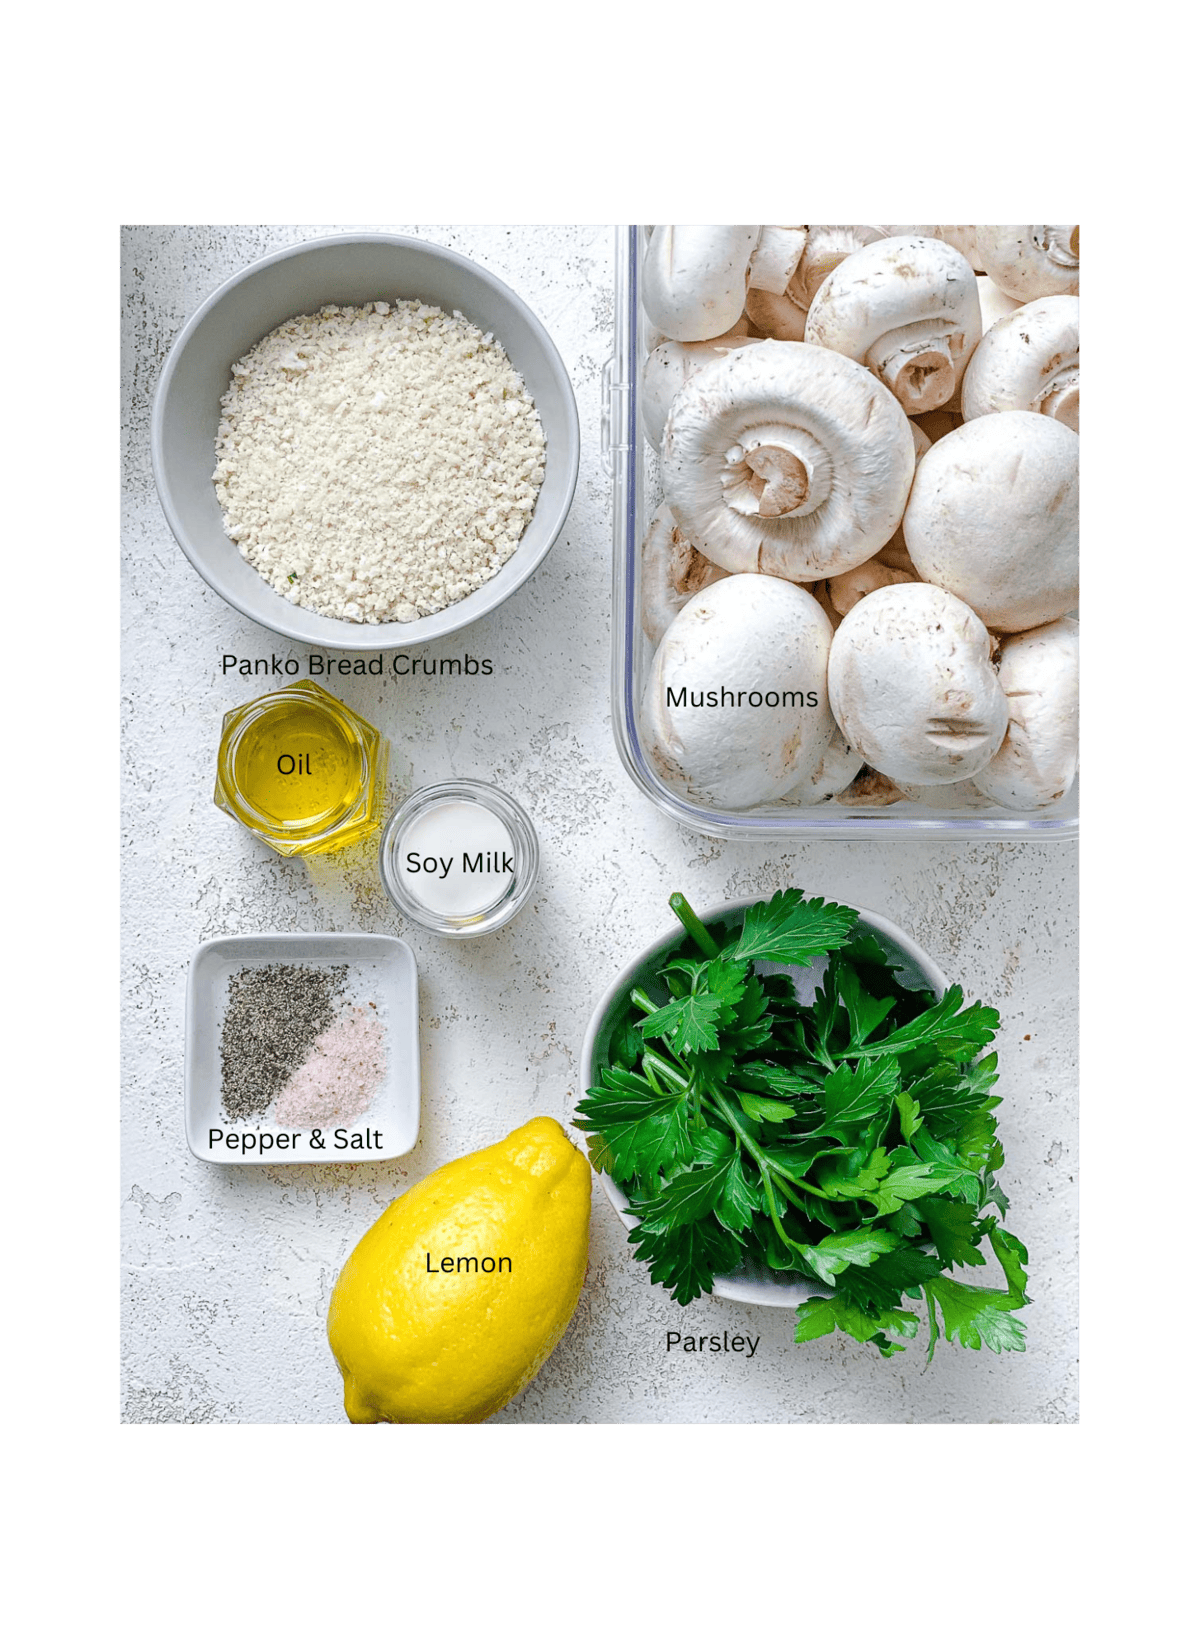 ingredients for Easy Vegan Stuffed Mushrooms measured out against a white surface